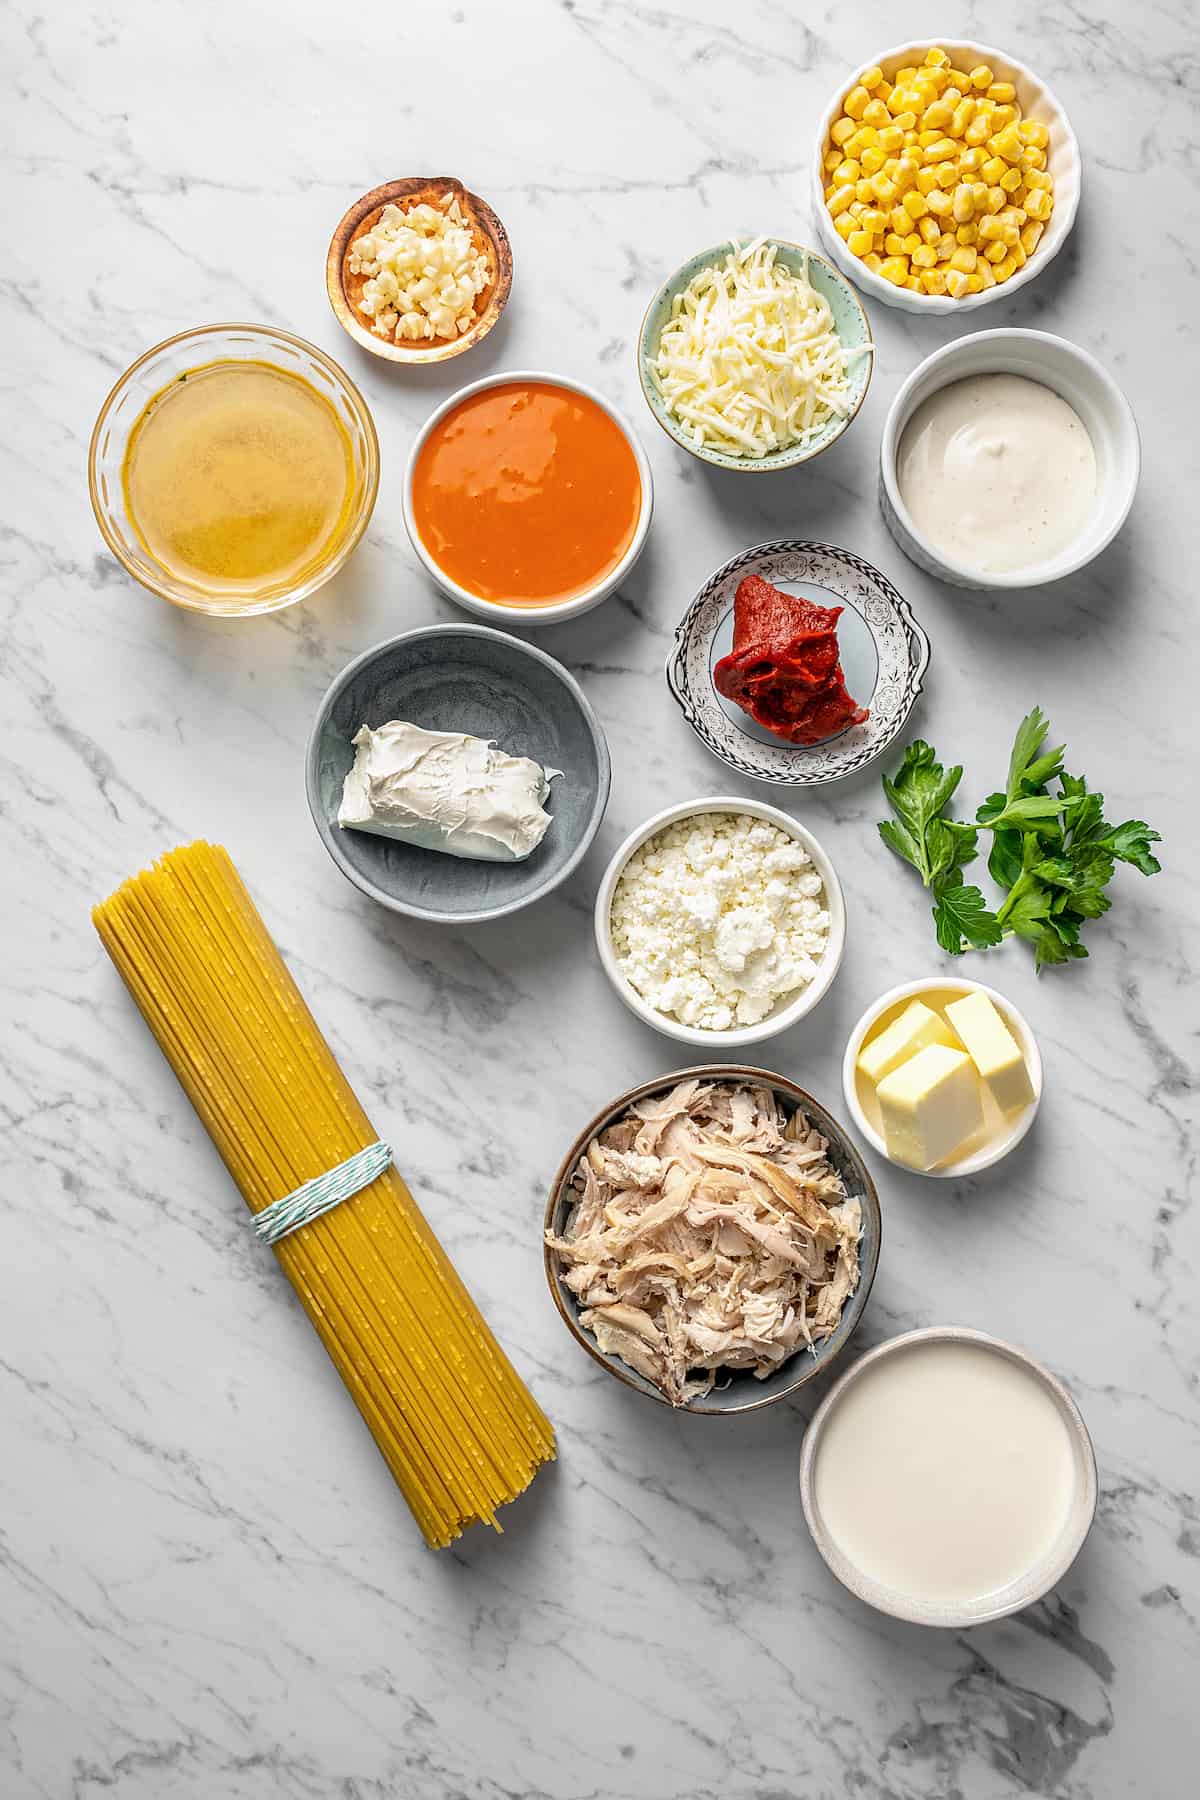 Ingredients for buffalo chicken pasta separated into bowls.